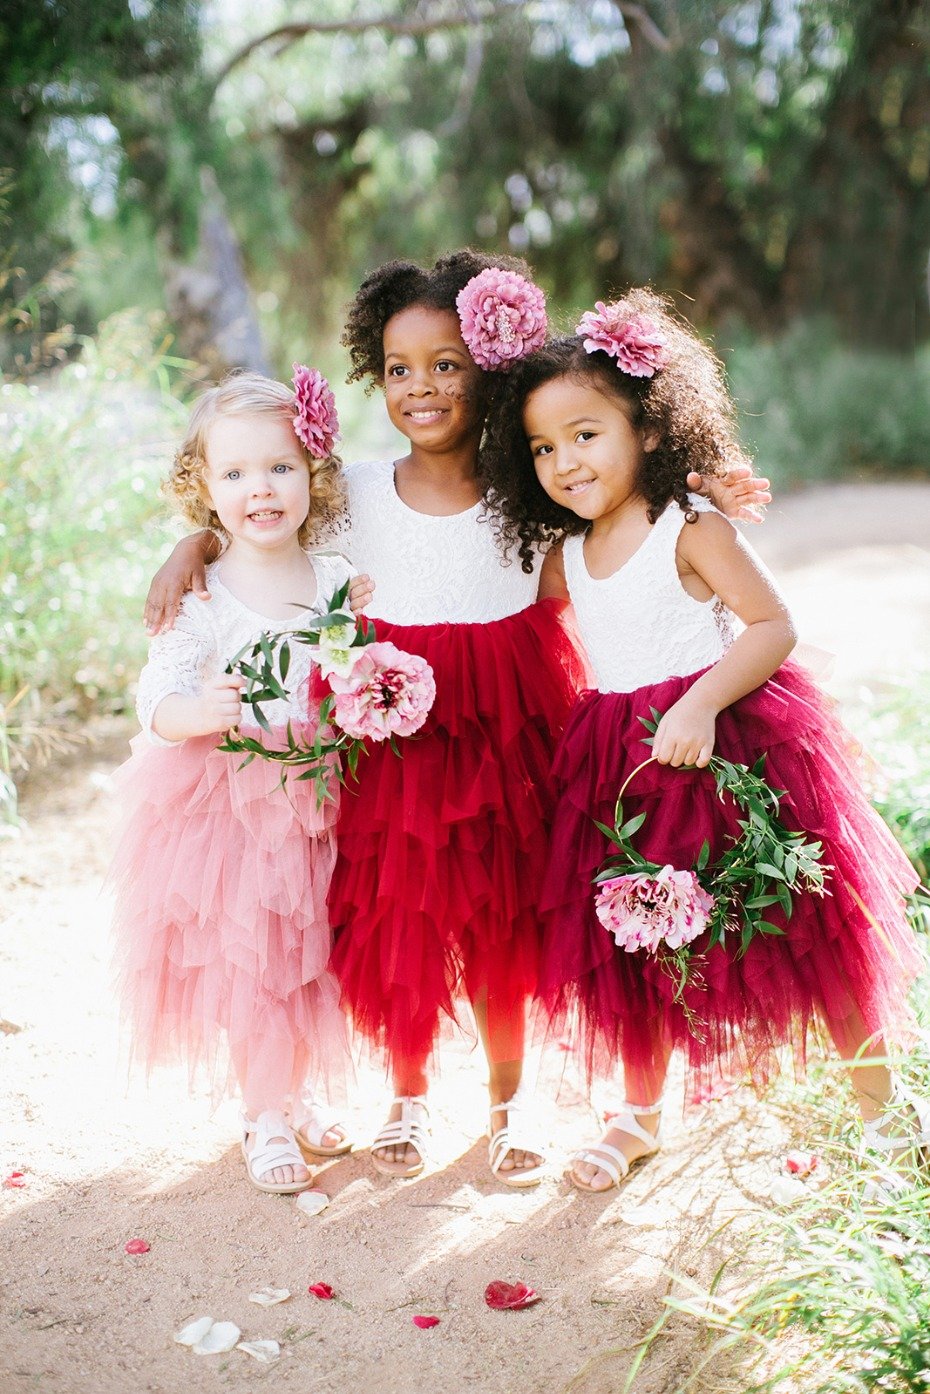 The Cool Kids Wedding Inspiration That is Ultra Sweet